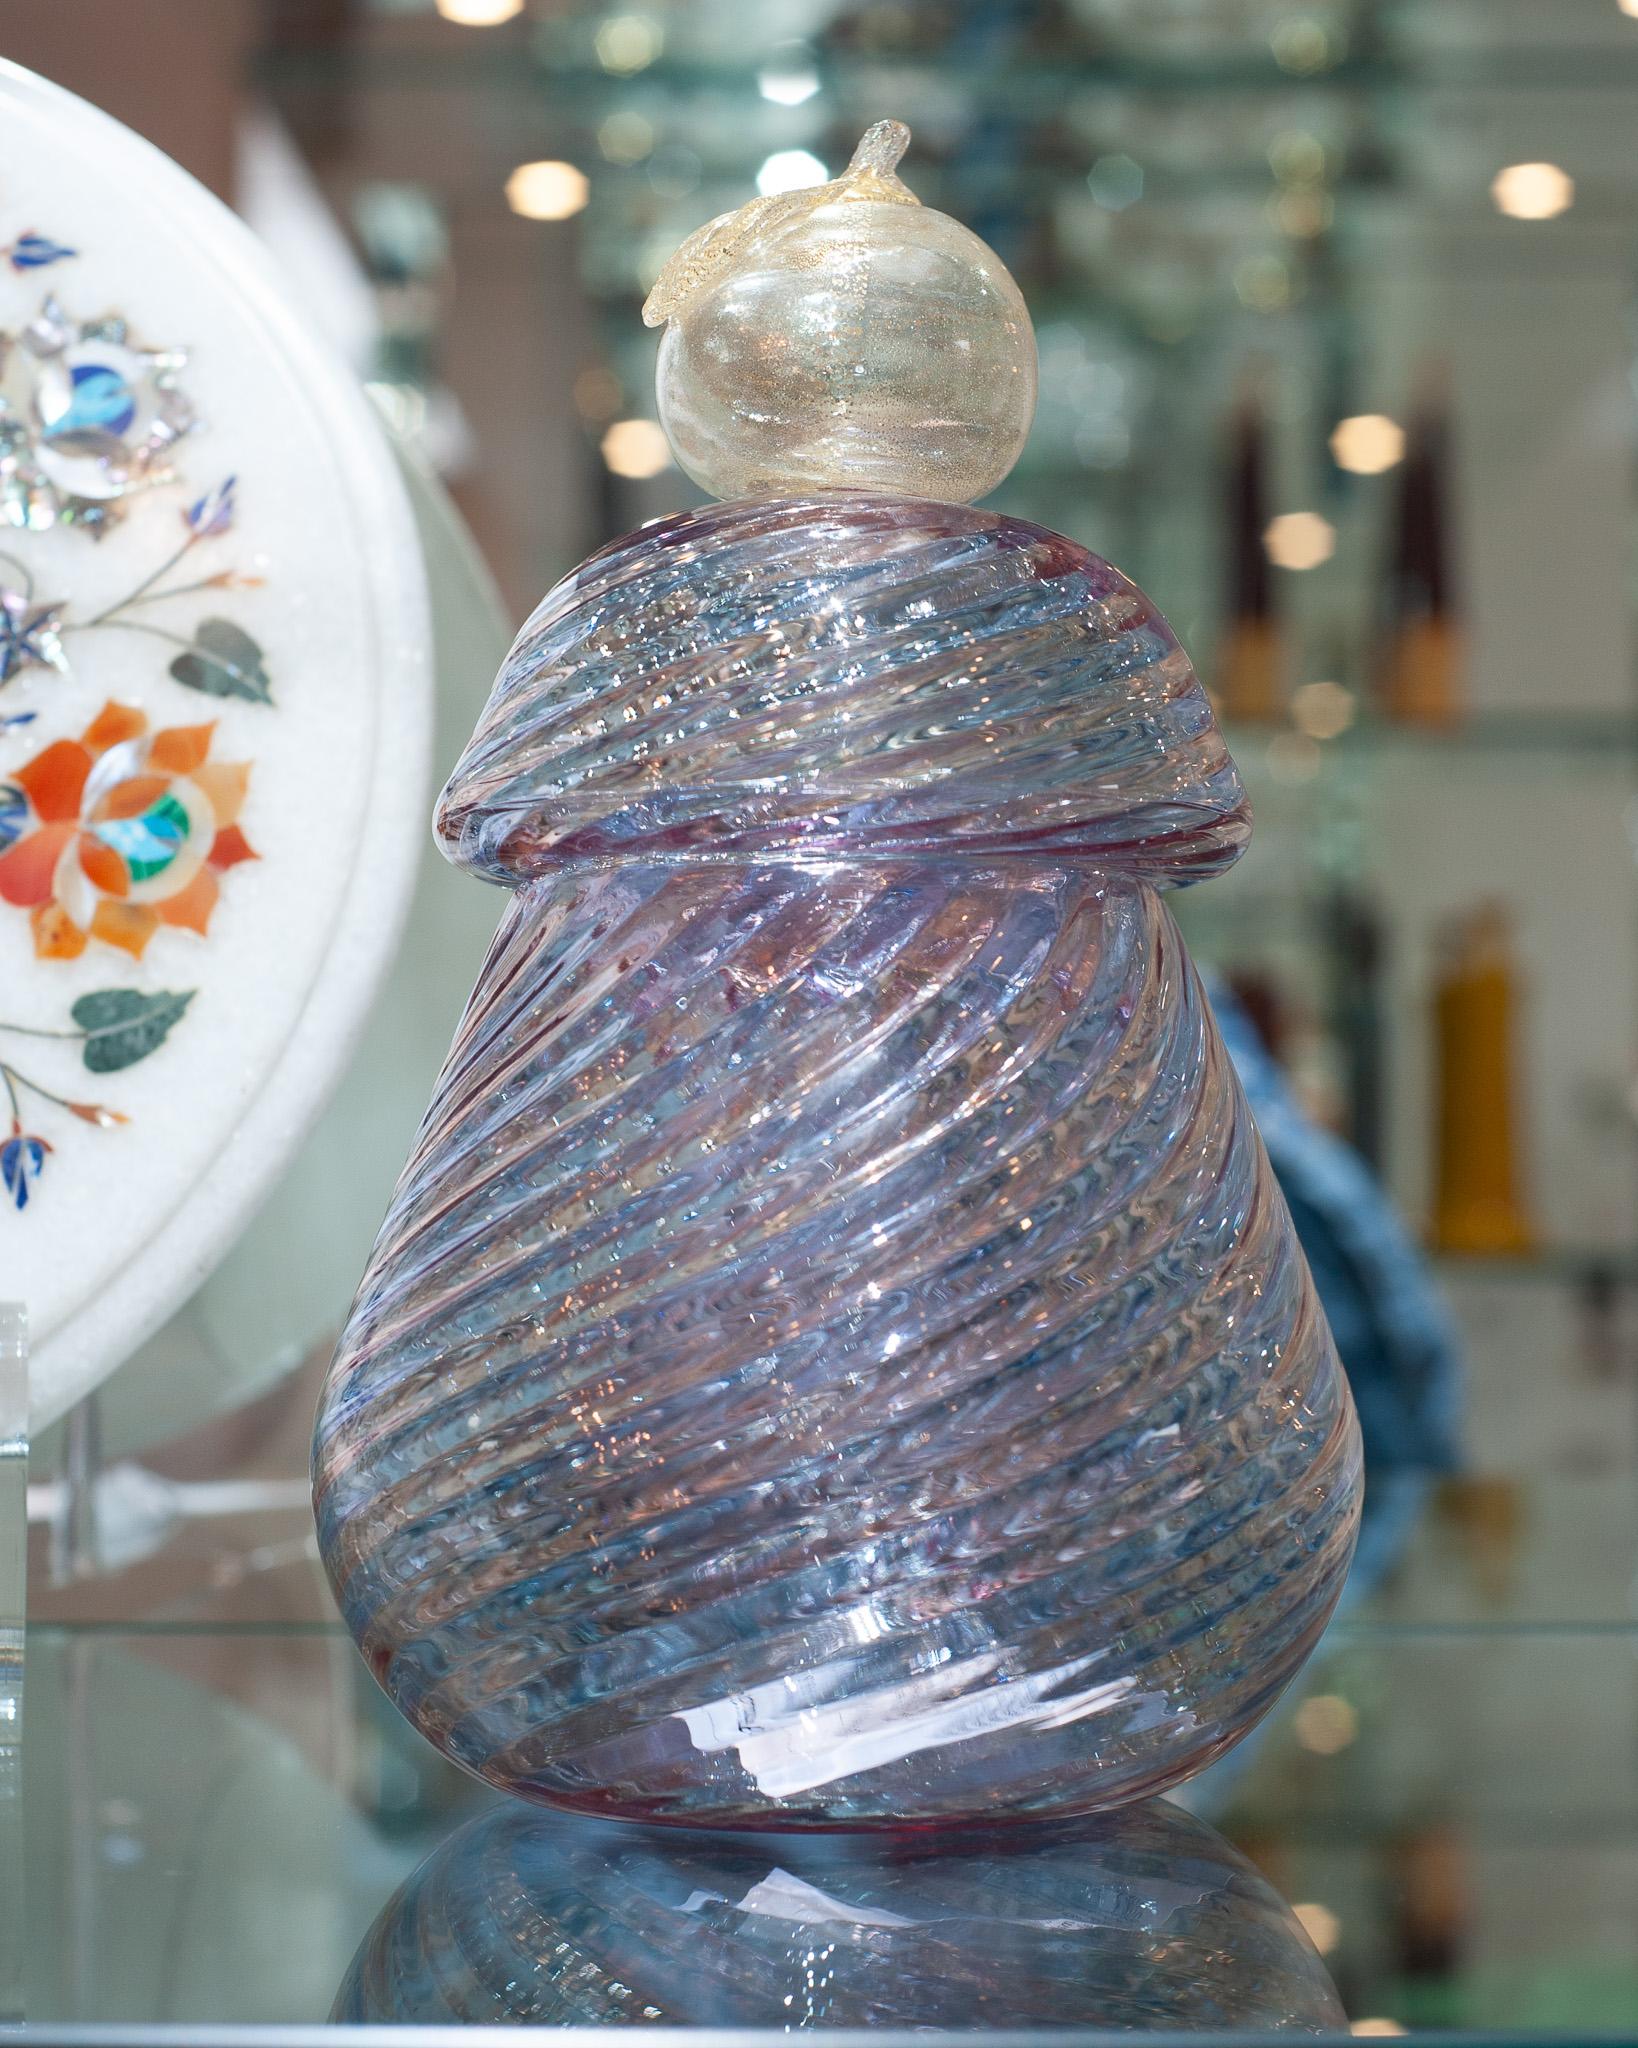 This stunning murano glass cookie jar is an elegant vessel to hold your favourite treats. Handblown murano glass in twisting swirls of pink and blue, with gold leaf apple lid. Signed by the artisan on underside, La Fornasotta di Gabriele Urban - a